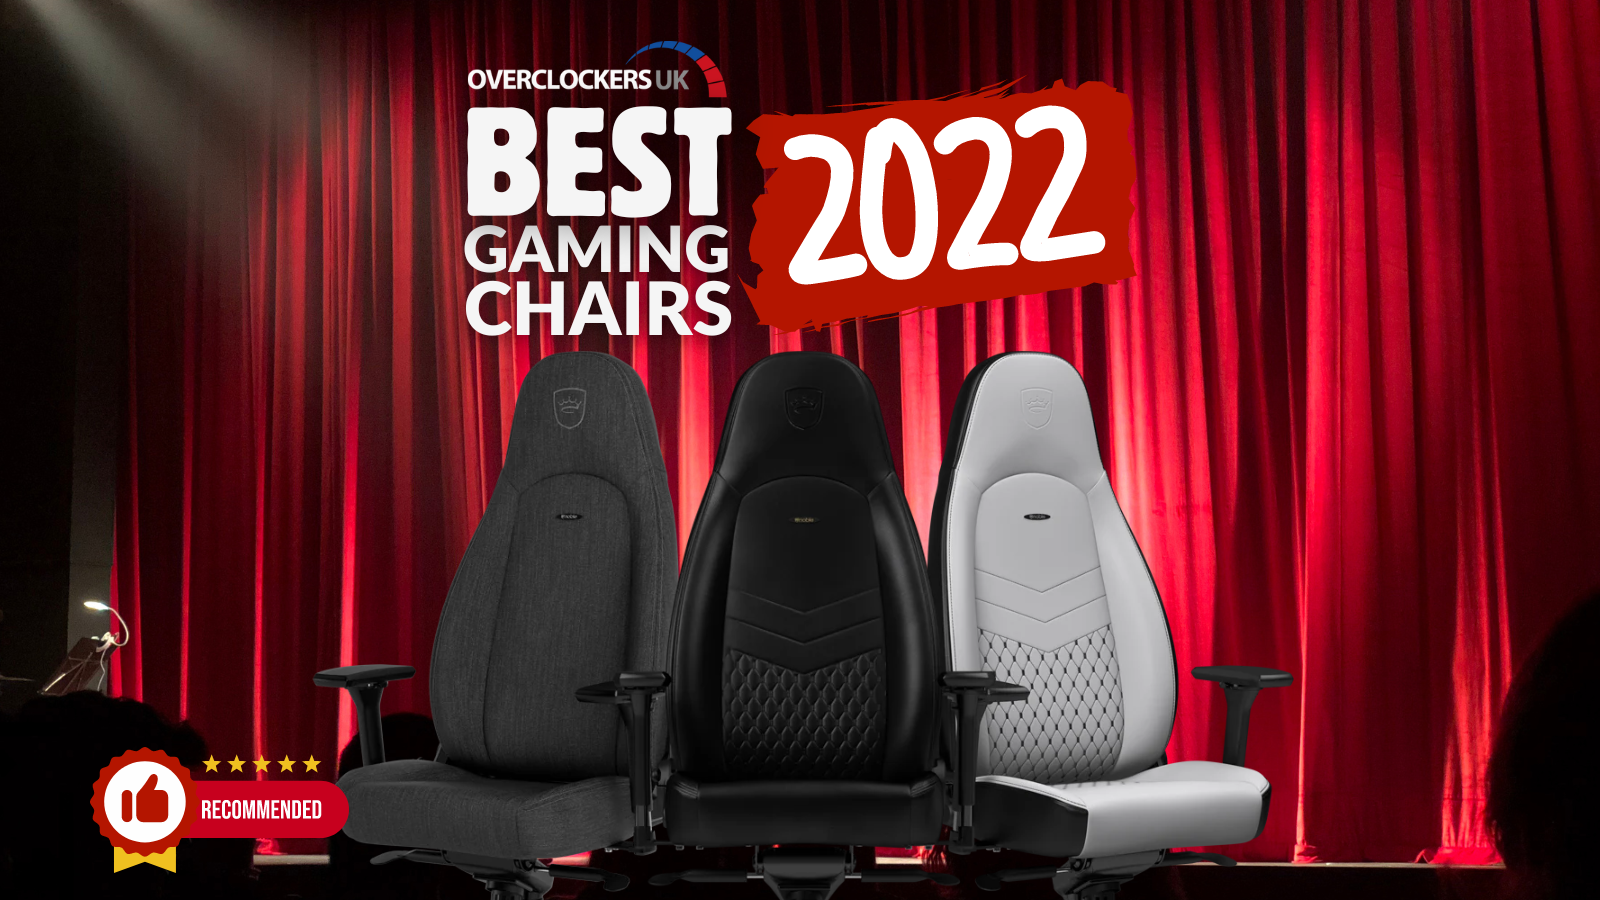 The Best Gaming Chairs of 2022!